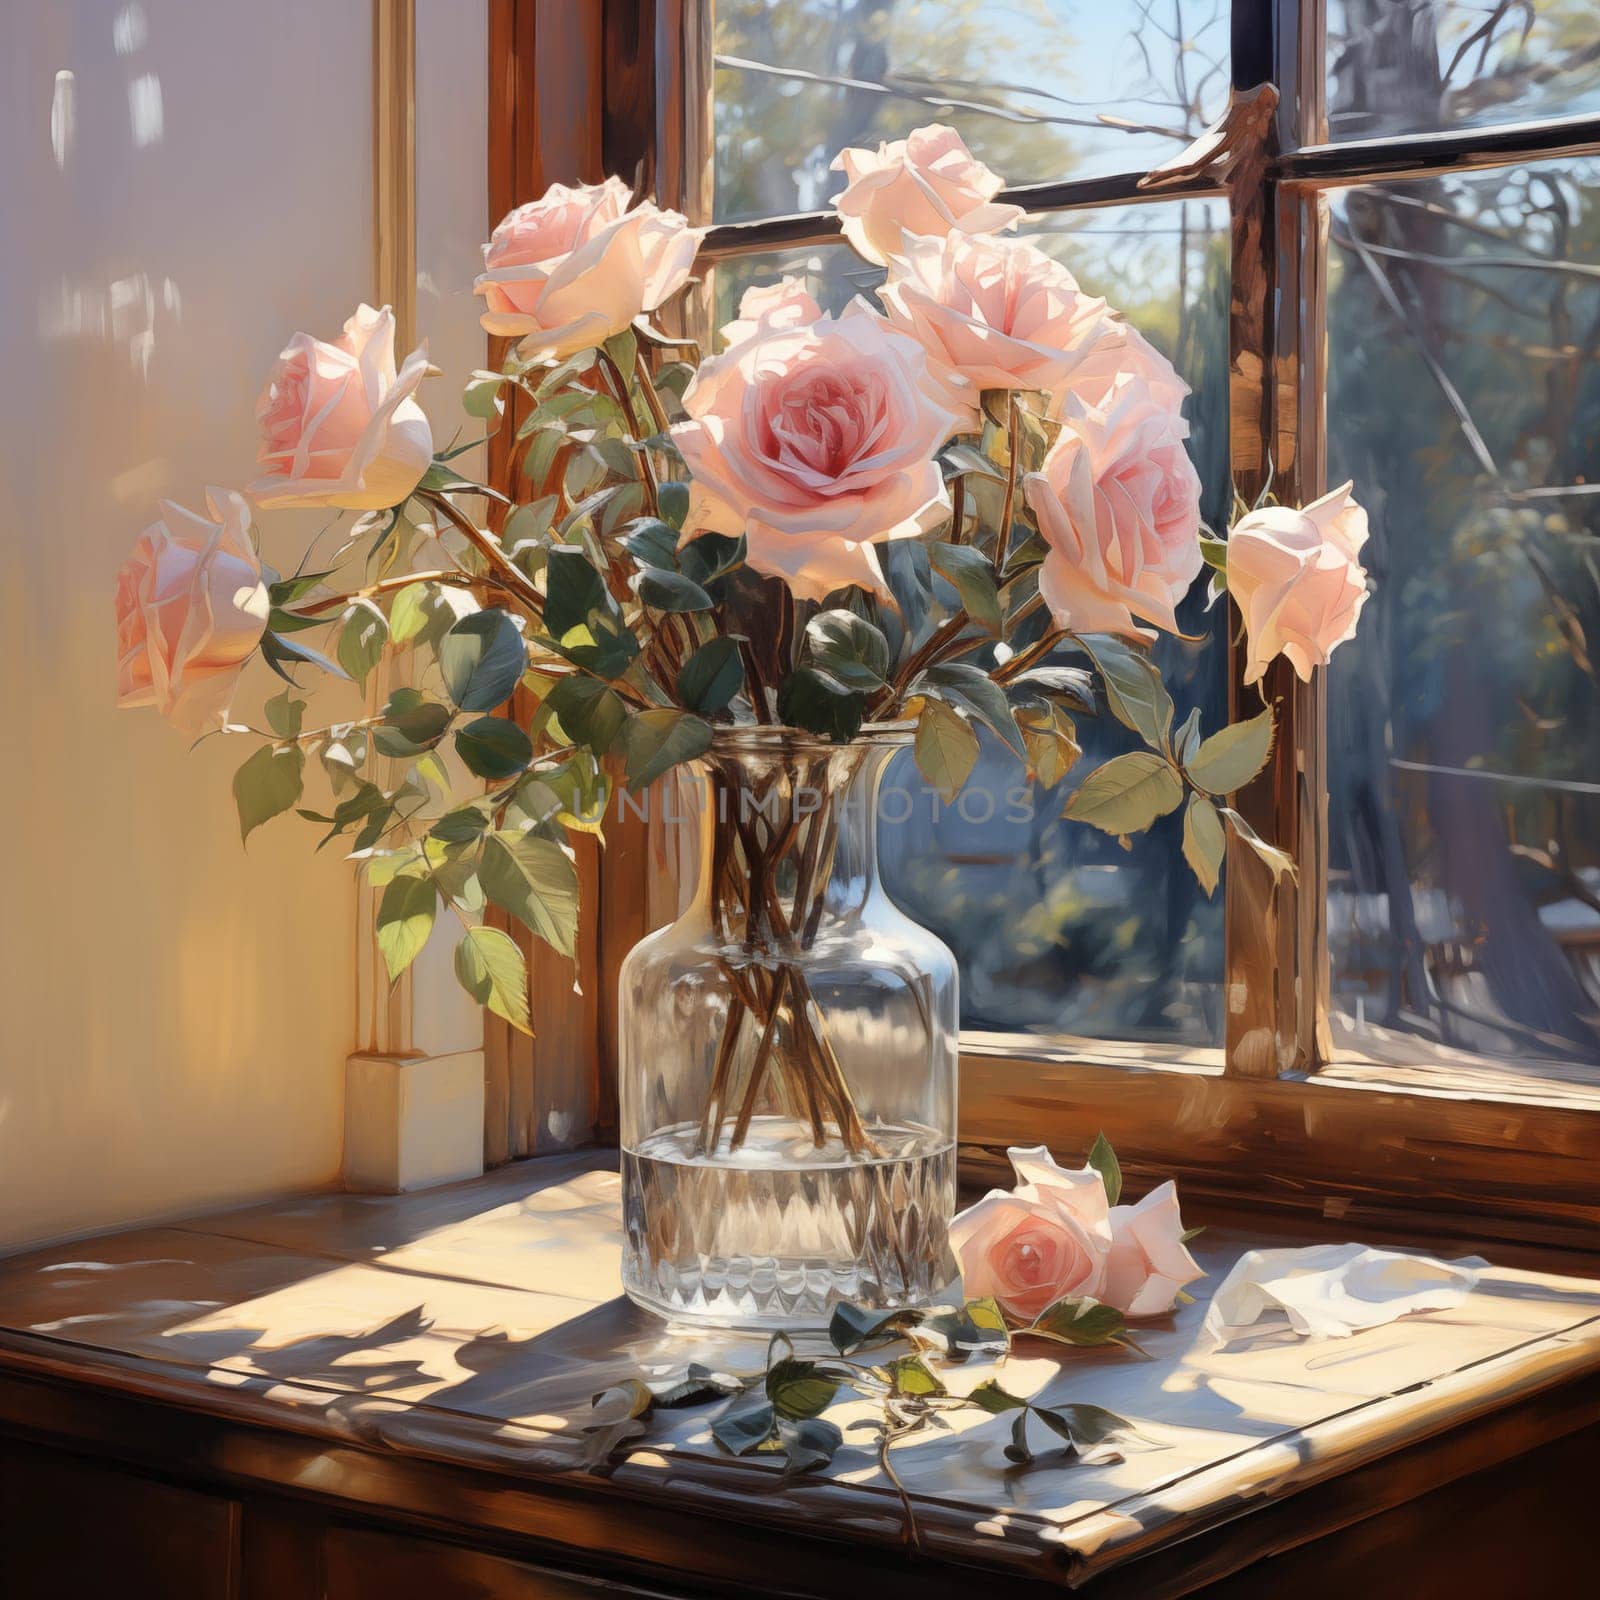 A bouquet of pink roses in a glass vase on a table near the window. by AnatoliiFoto